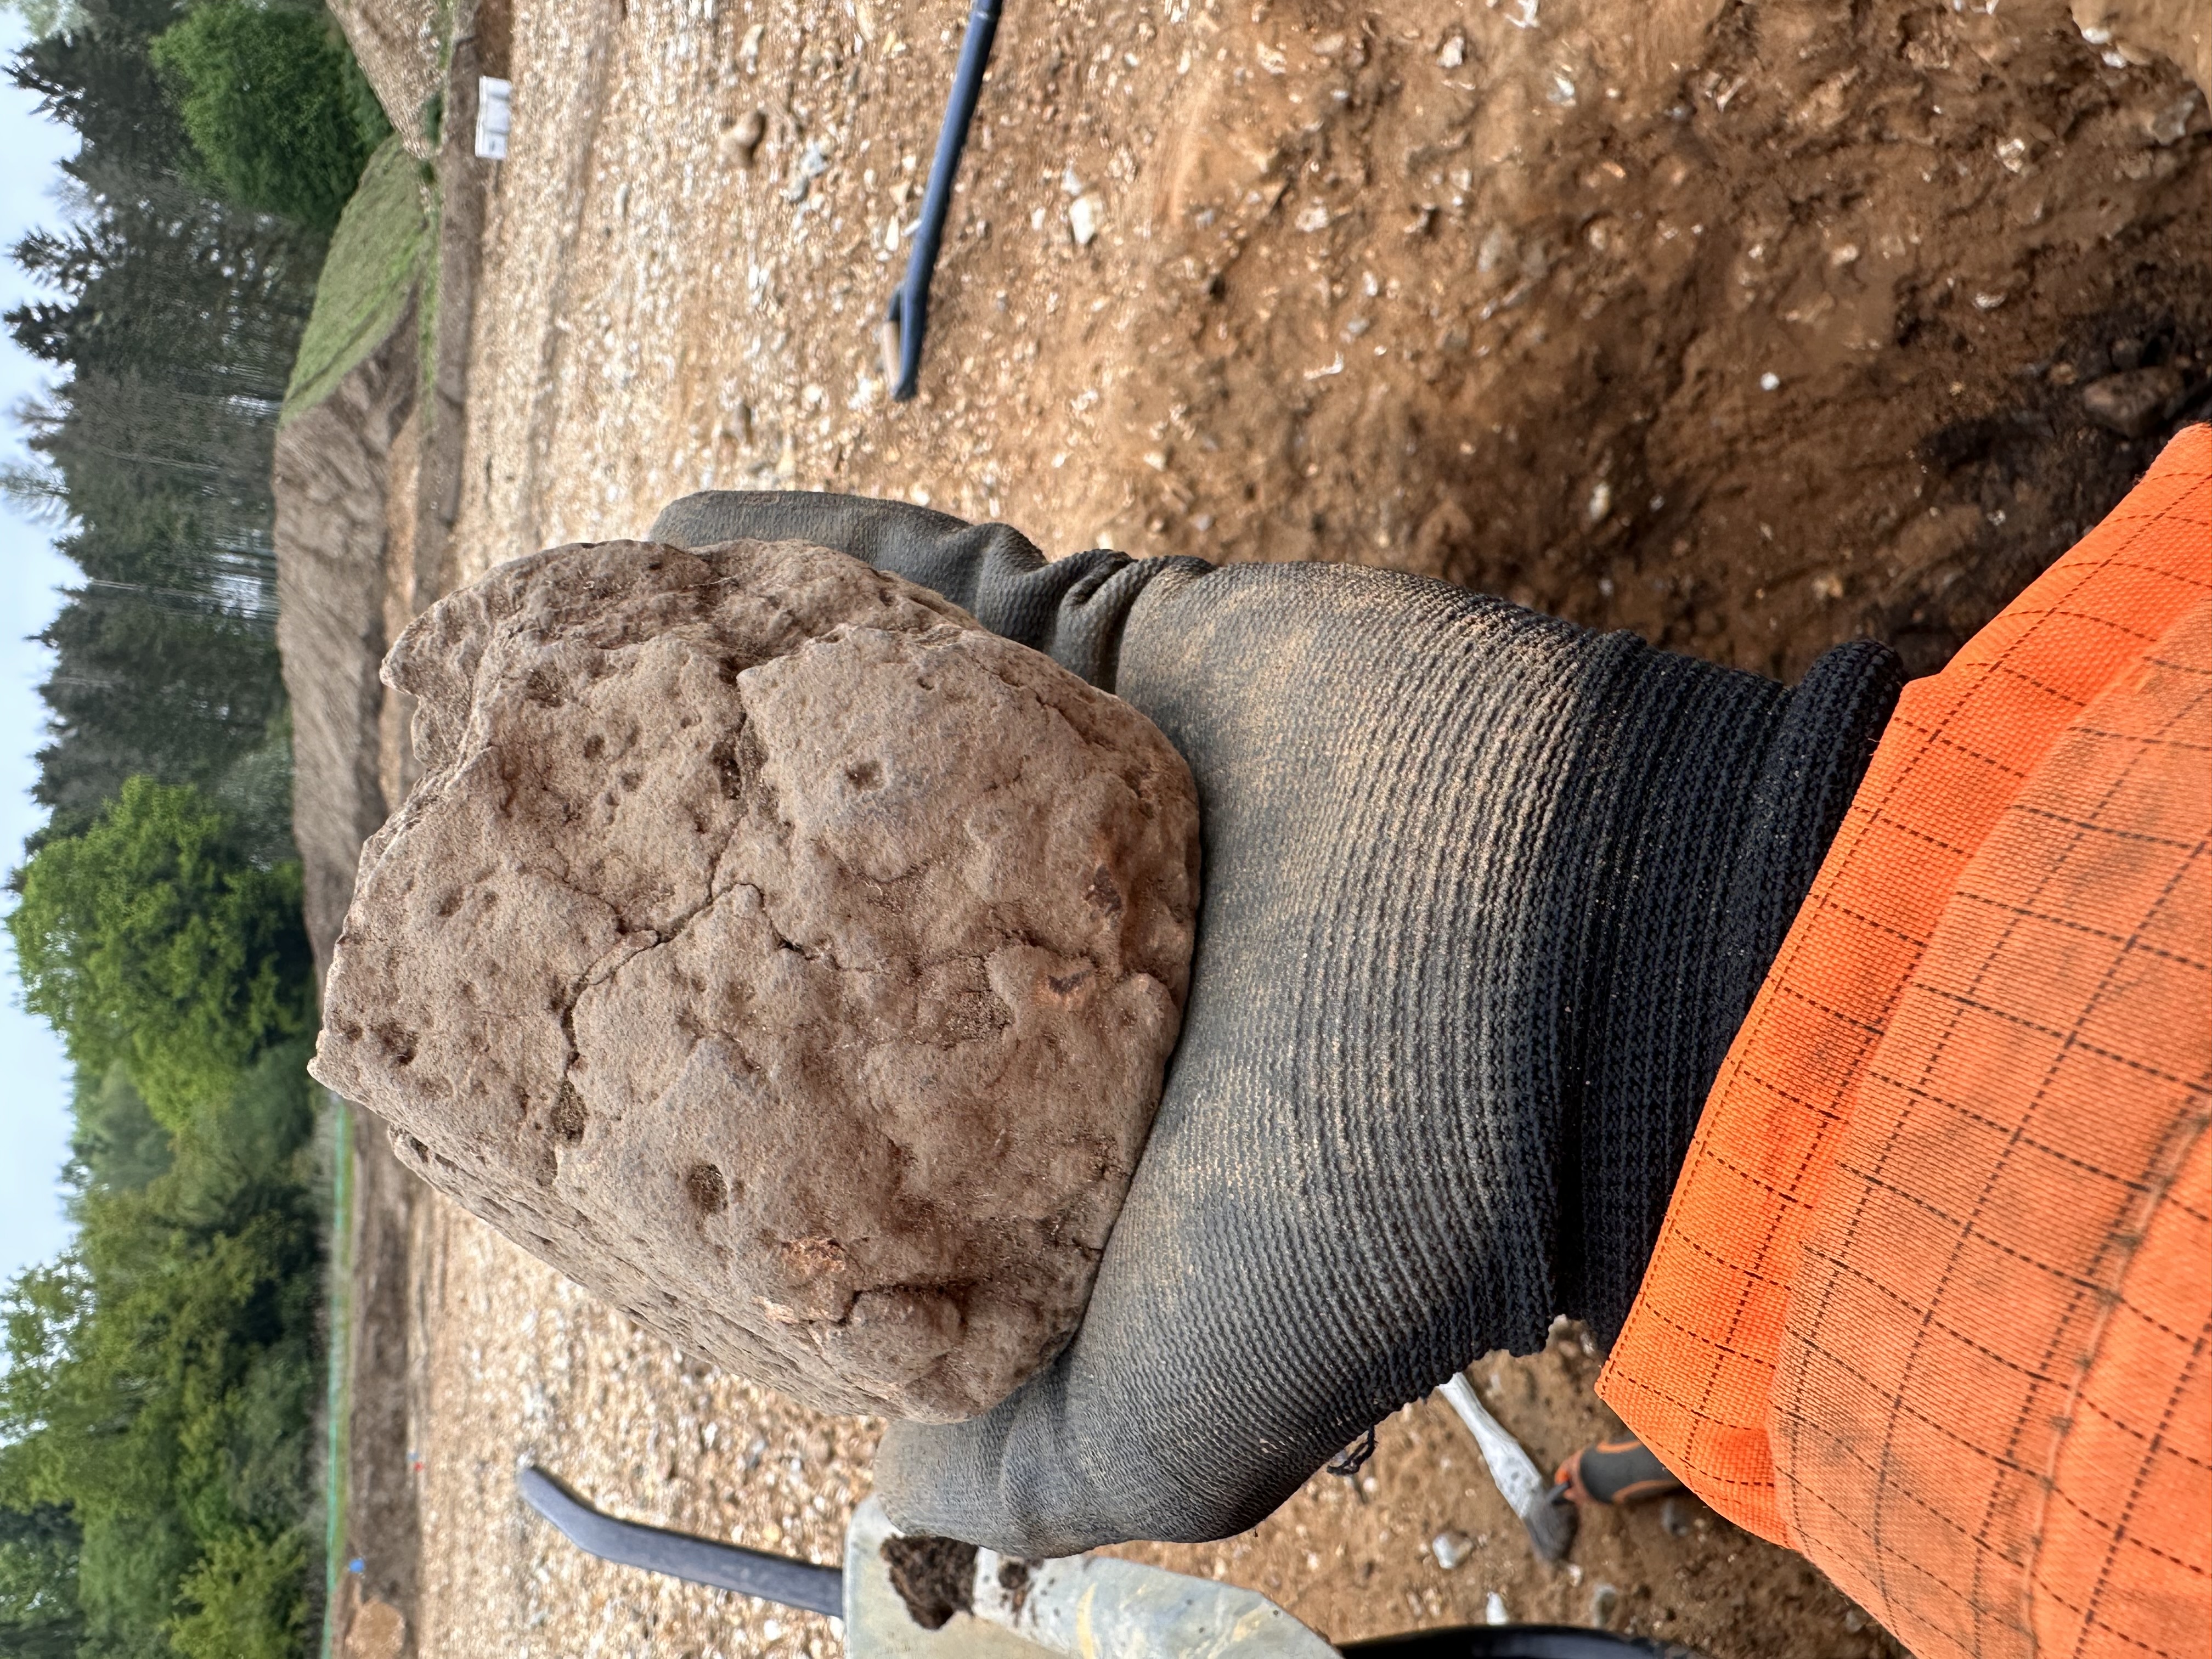 A lump of fired clay held in a gloved hand.